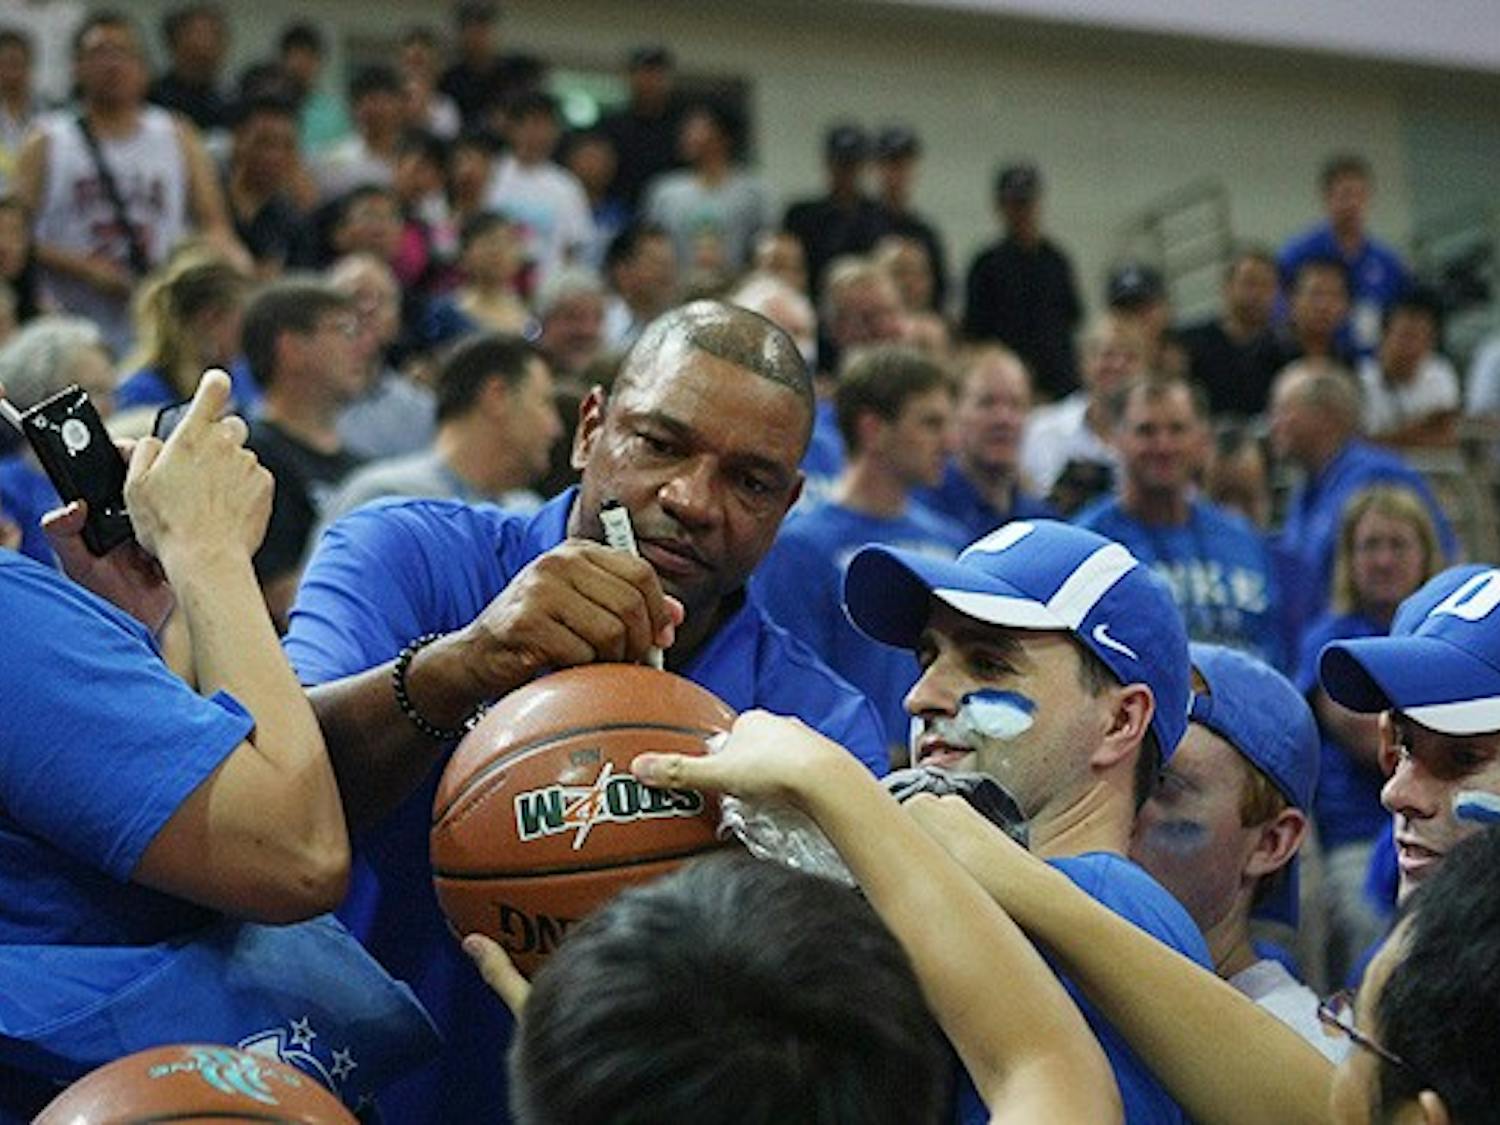 Boston Celtics coach Doc Rivers, father of Duke freshman Austin Rivers, signs autographs at one of Duke’s games in China.